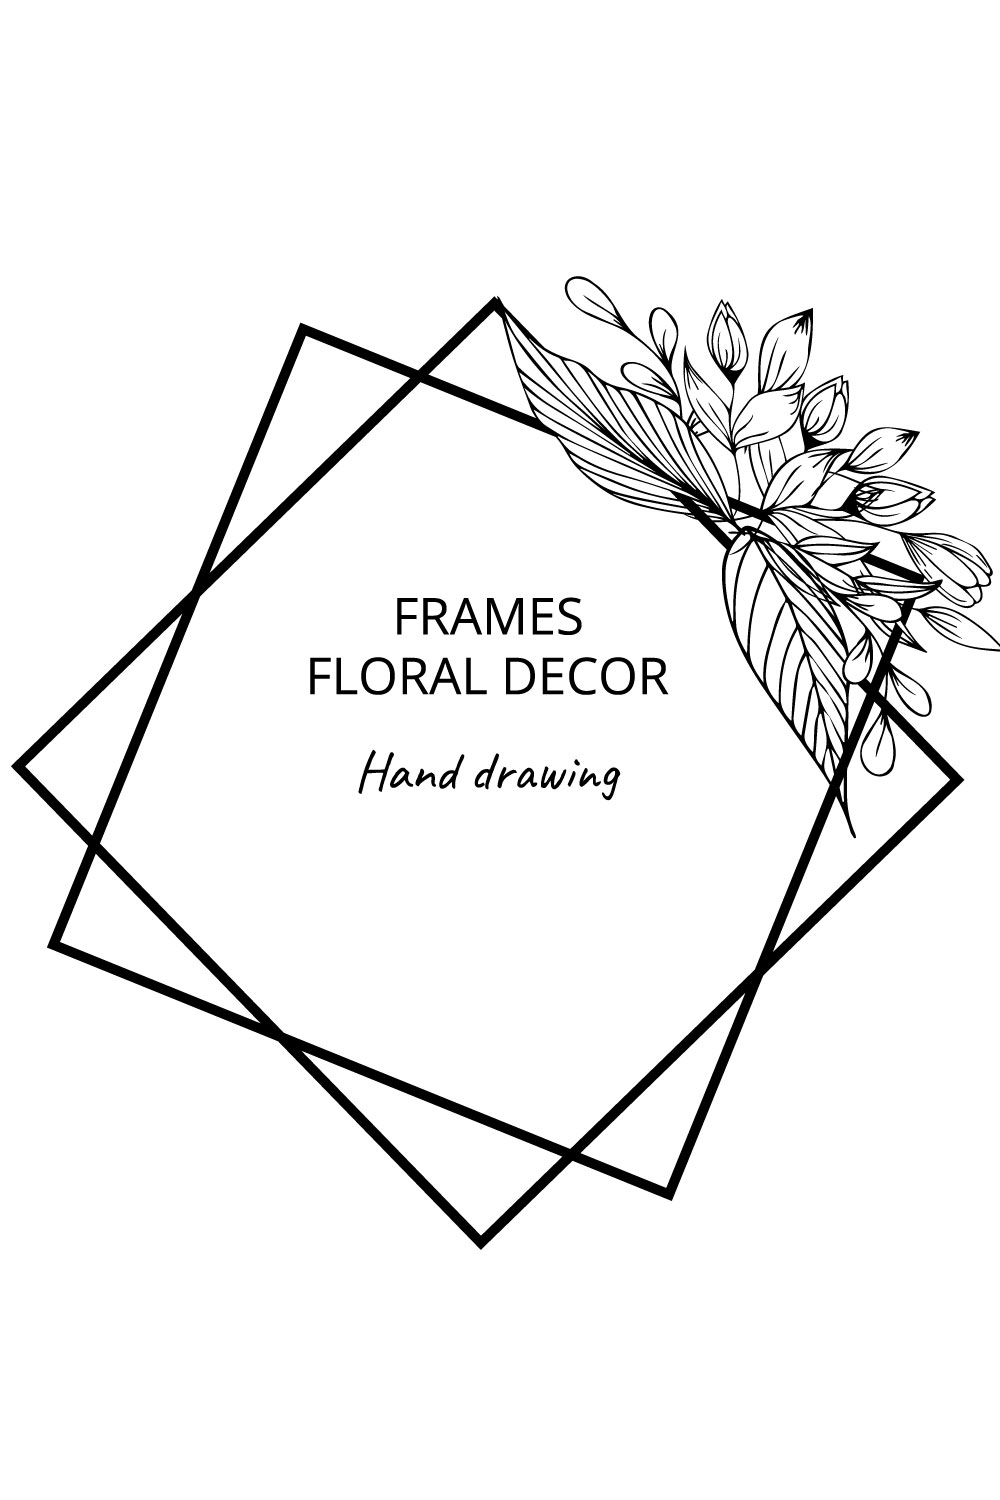 Frame with Floral Decor and Elements of Decor pinterest image.